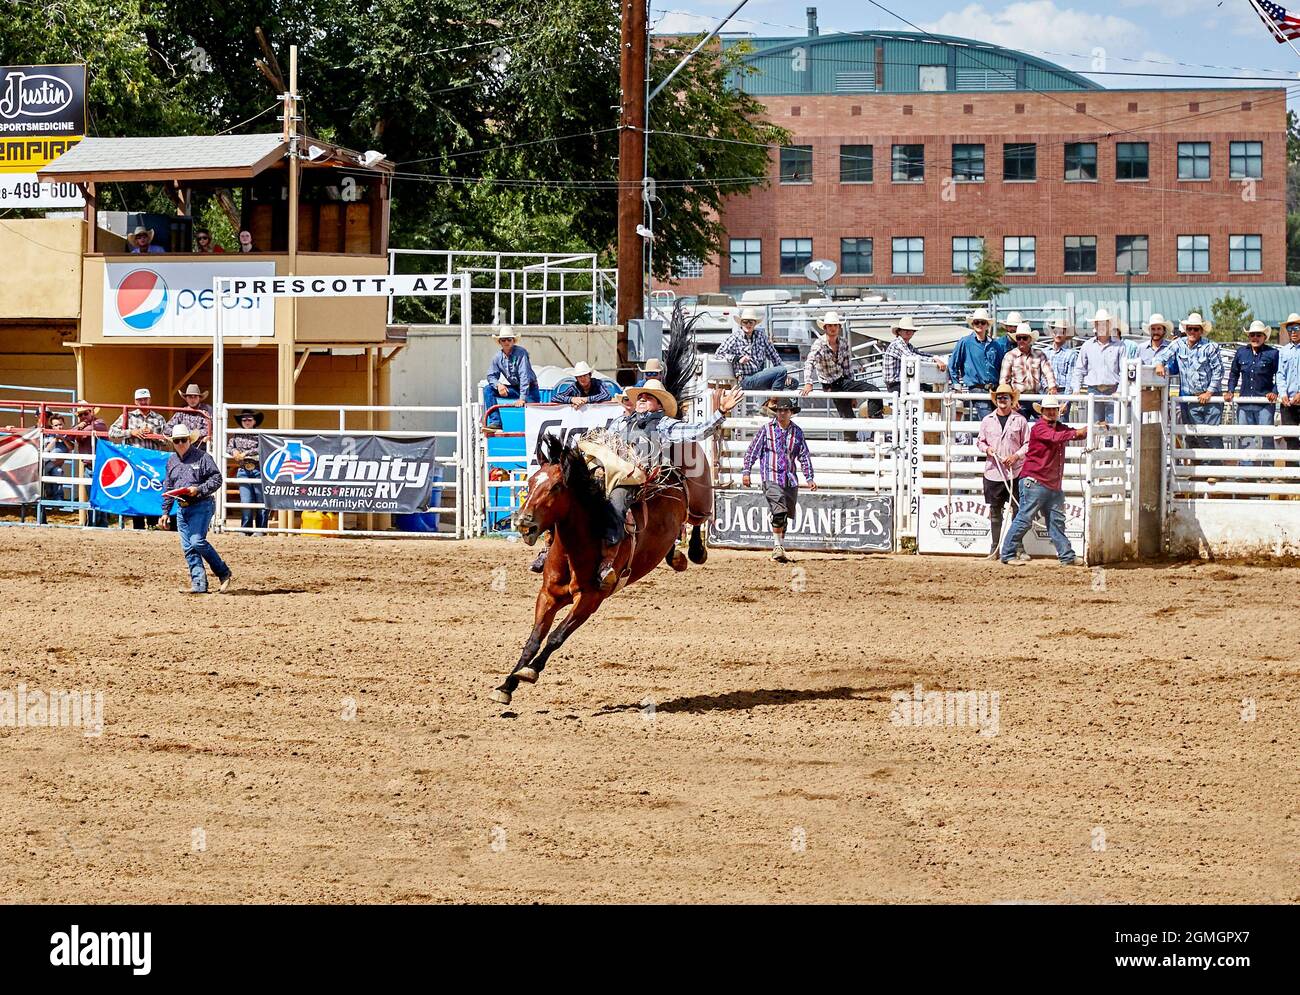 Prescott, Arizona, USA - September 12, 2021: Cowboy competing on a bucking horse at the rodeo competition held at the Prescott Rodeo Fair grounds duri Stock Photo